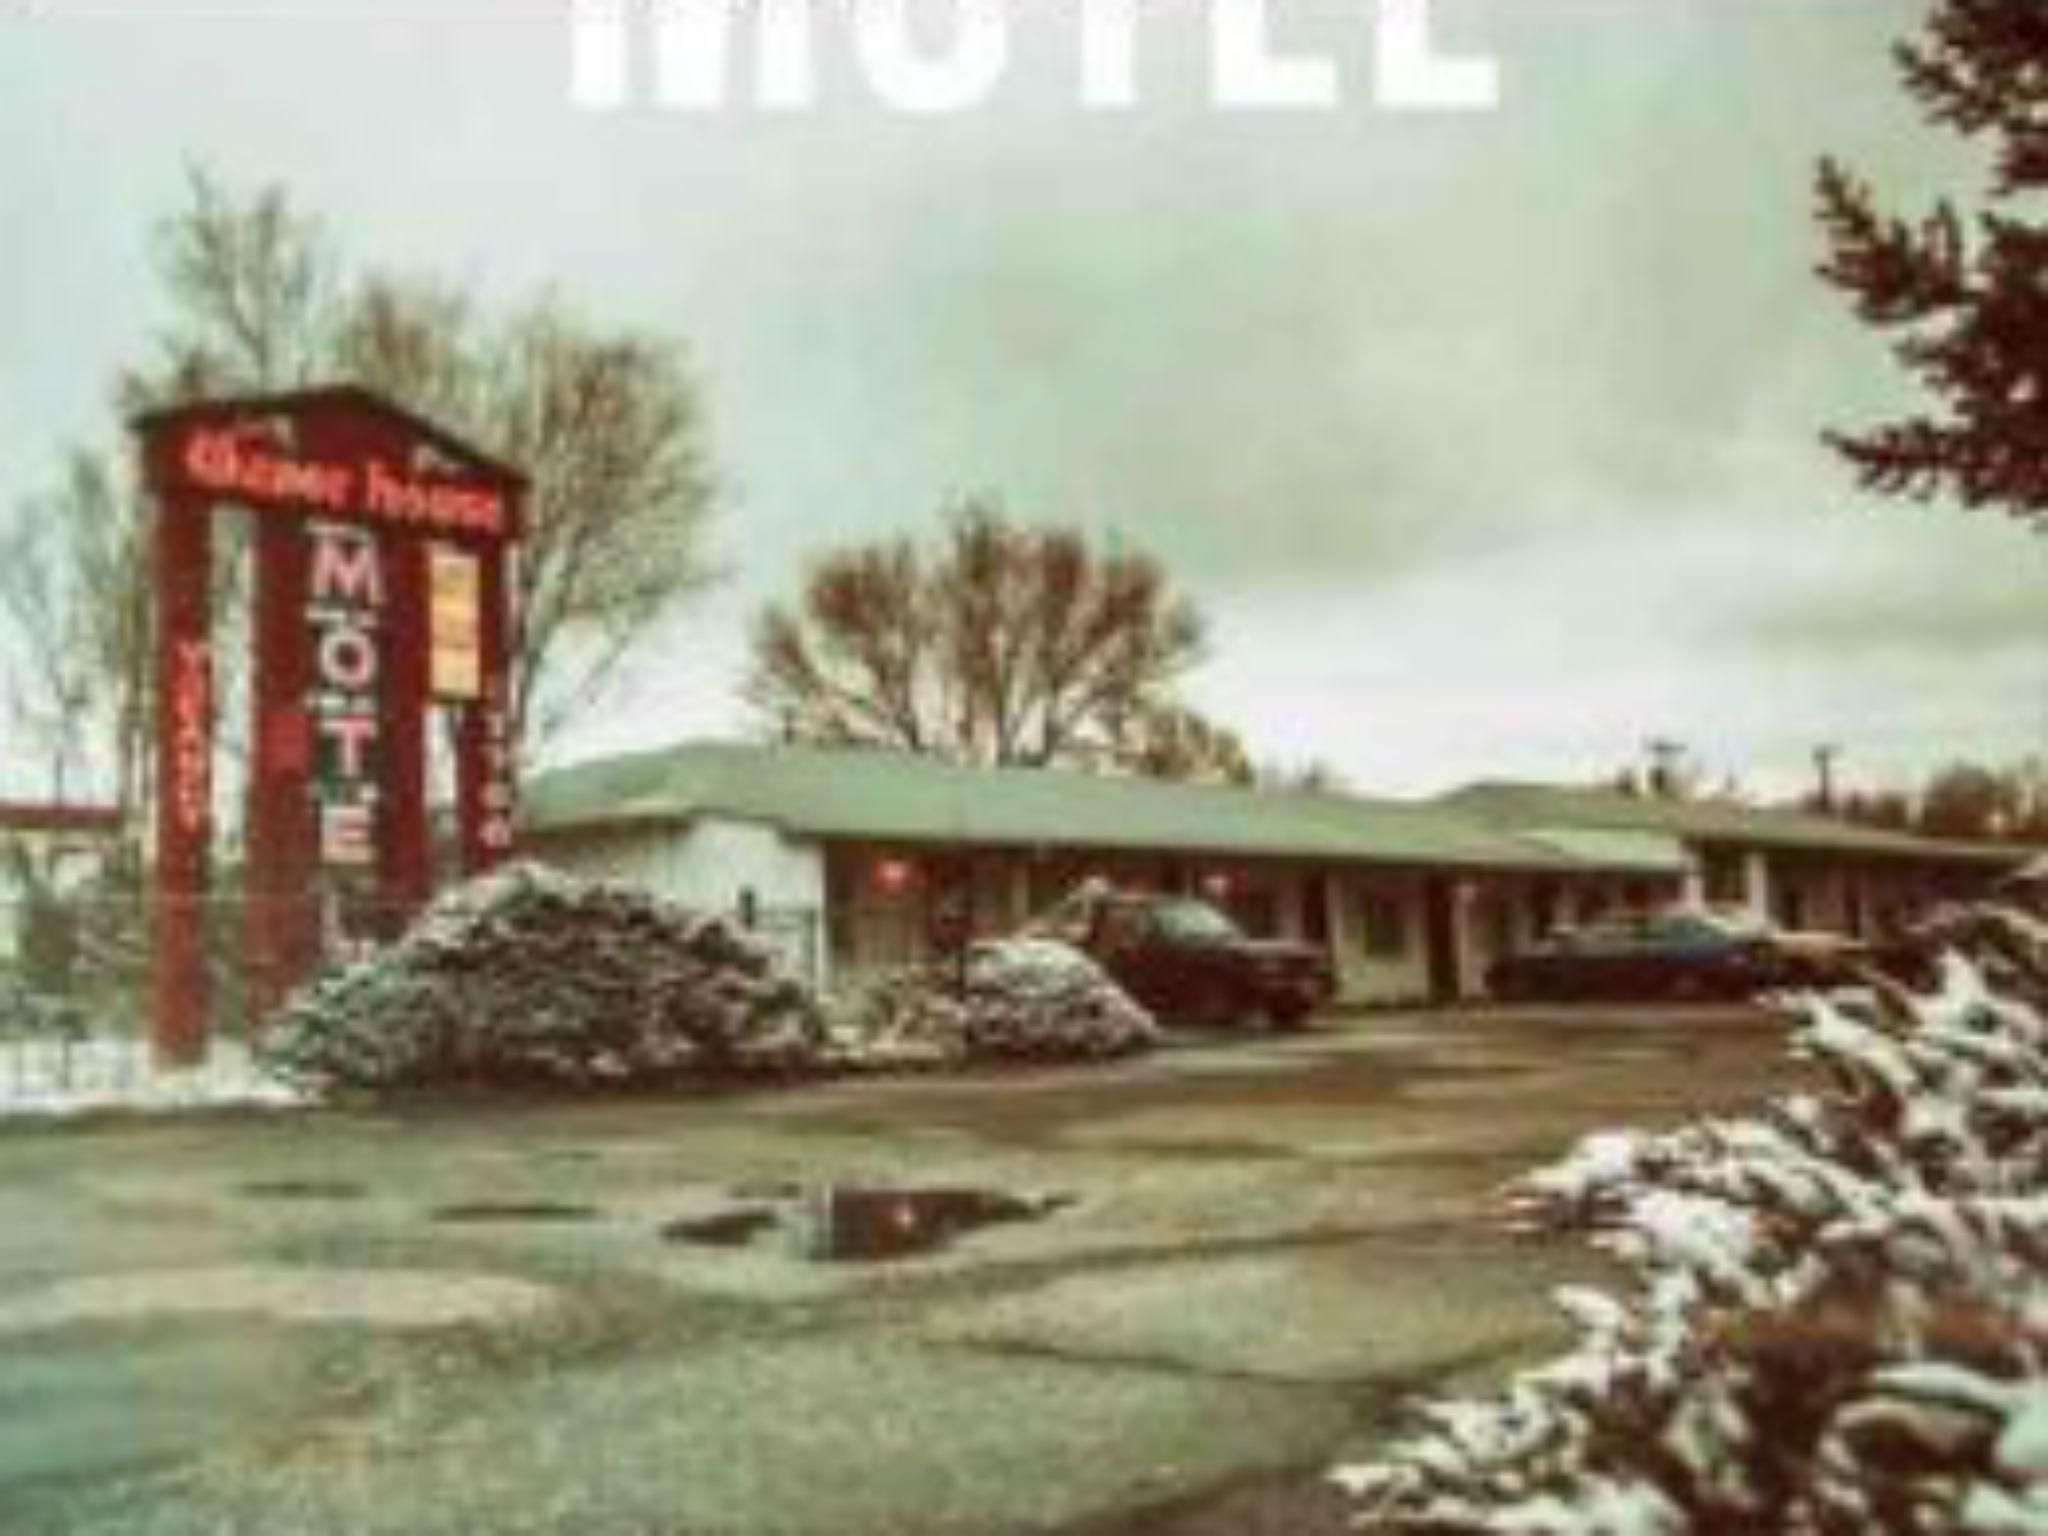 The Voyeurs Motel, book review Spare yourself the trouble of reading this seedy little book The Independent The Independent image pic